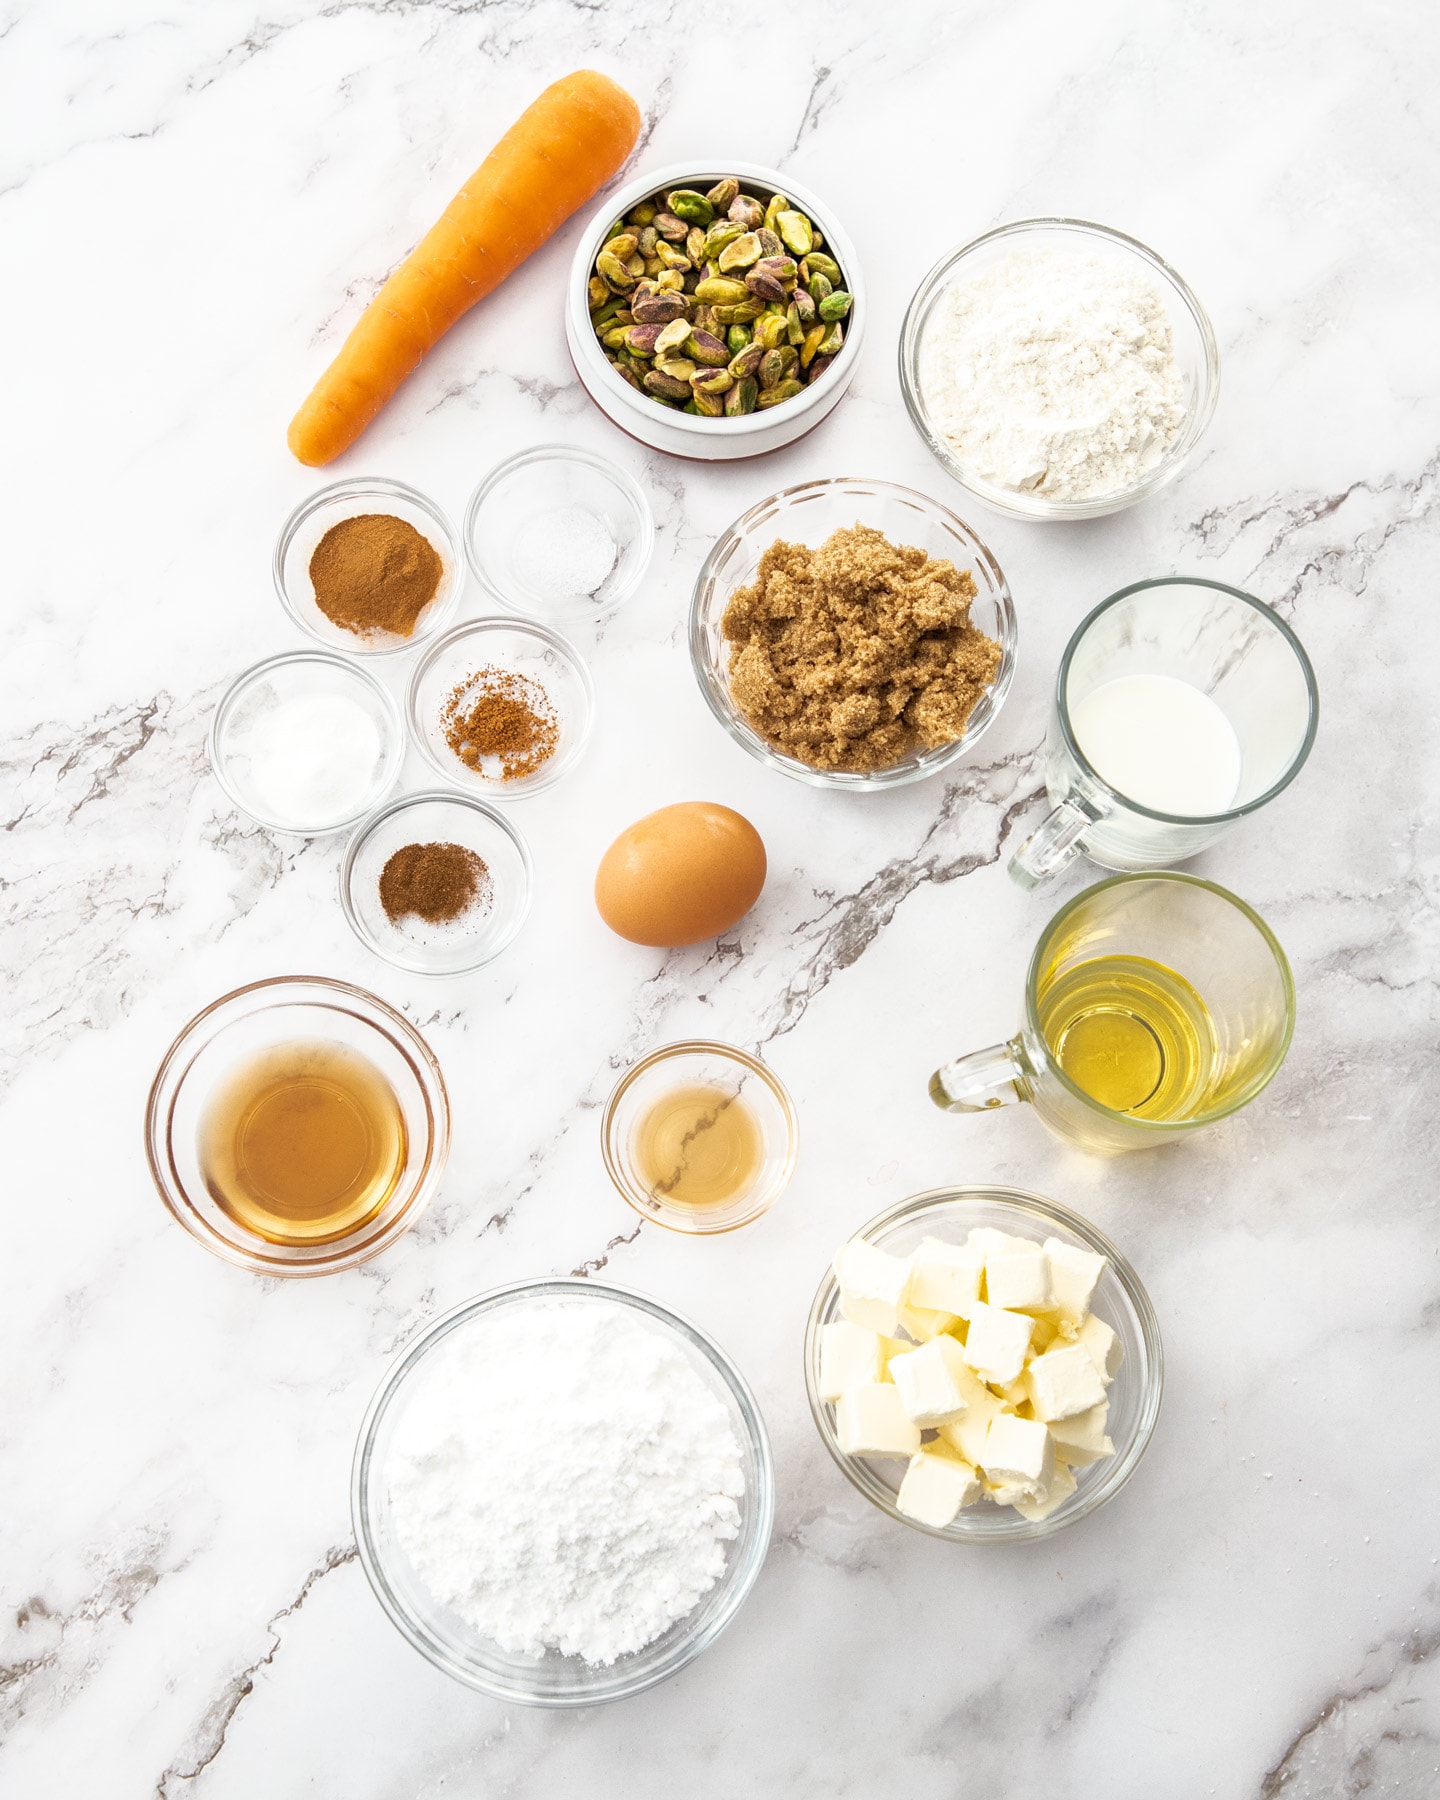 Ingredients for carrot cake donuts on a marble surface.